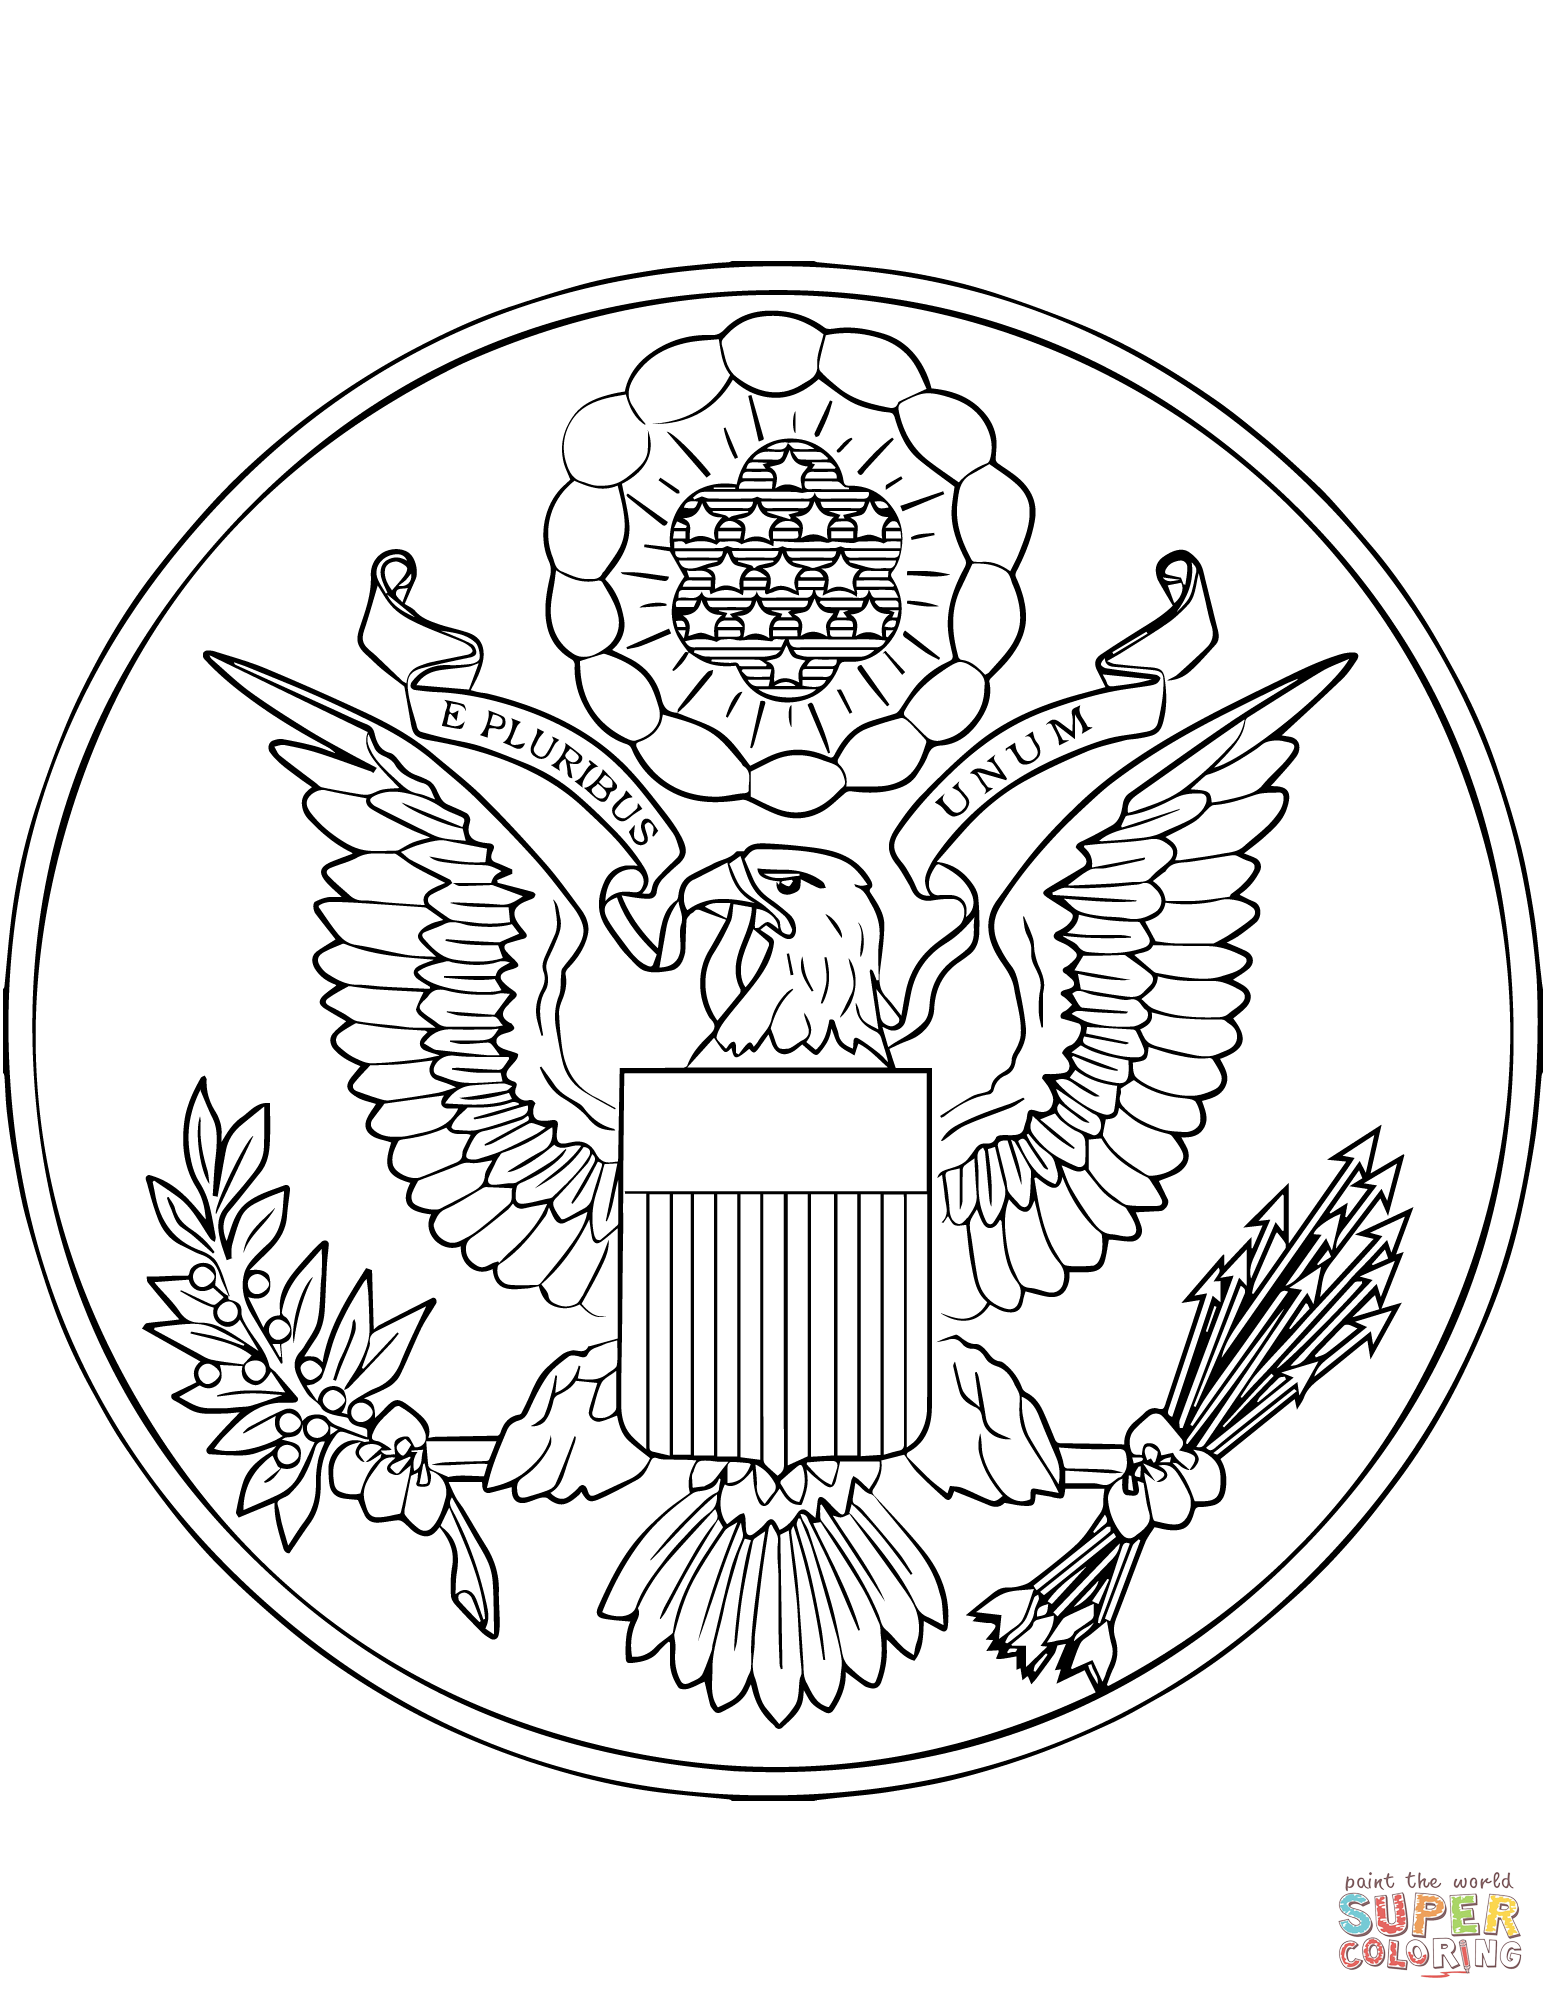 Great Seal of the United States coloring page | Free Printable Coloring  Pages